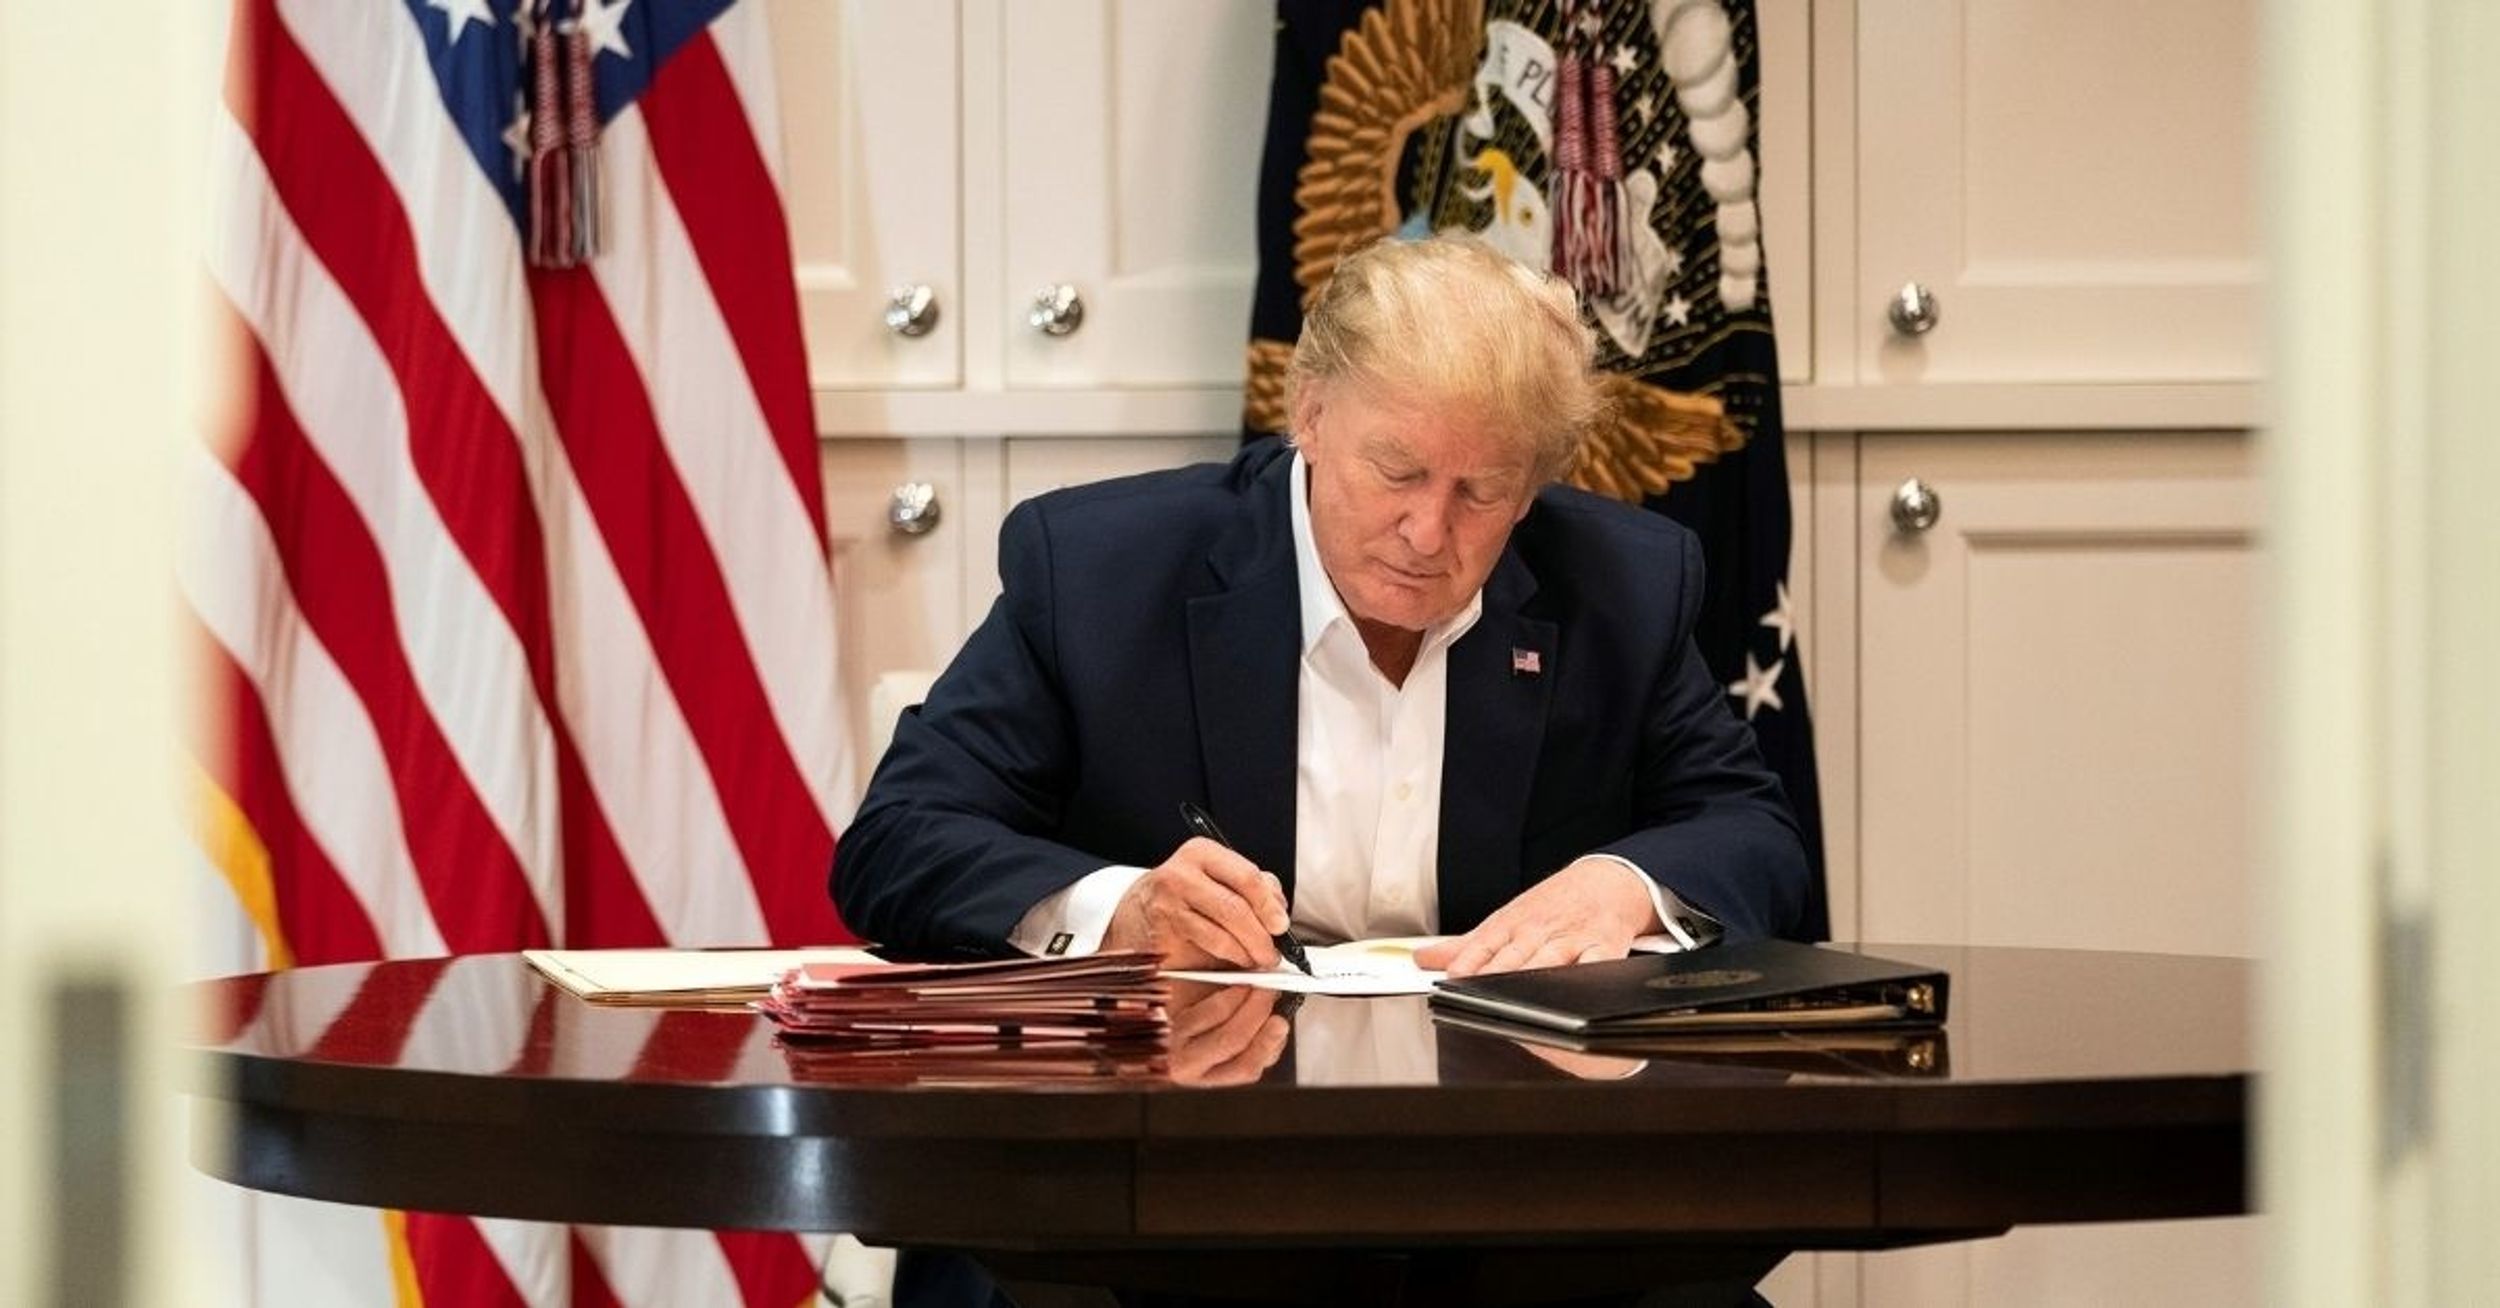 Trump Dragged After Photo Of Him 'Working' At Walter Reed Shows Him Signing A Blank Sheet Of Paper